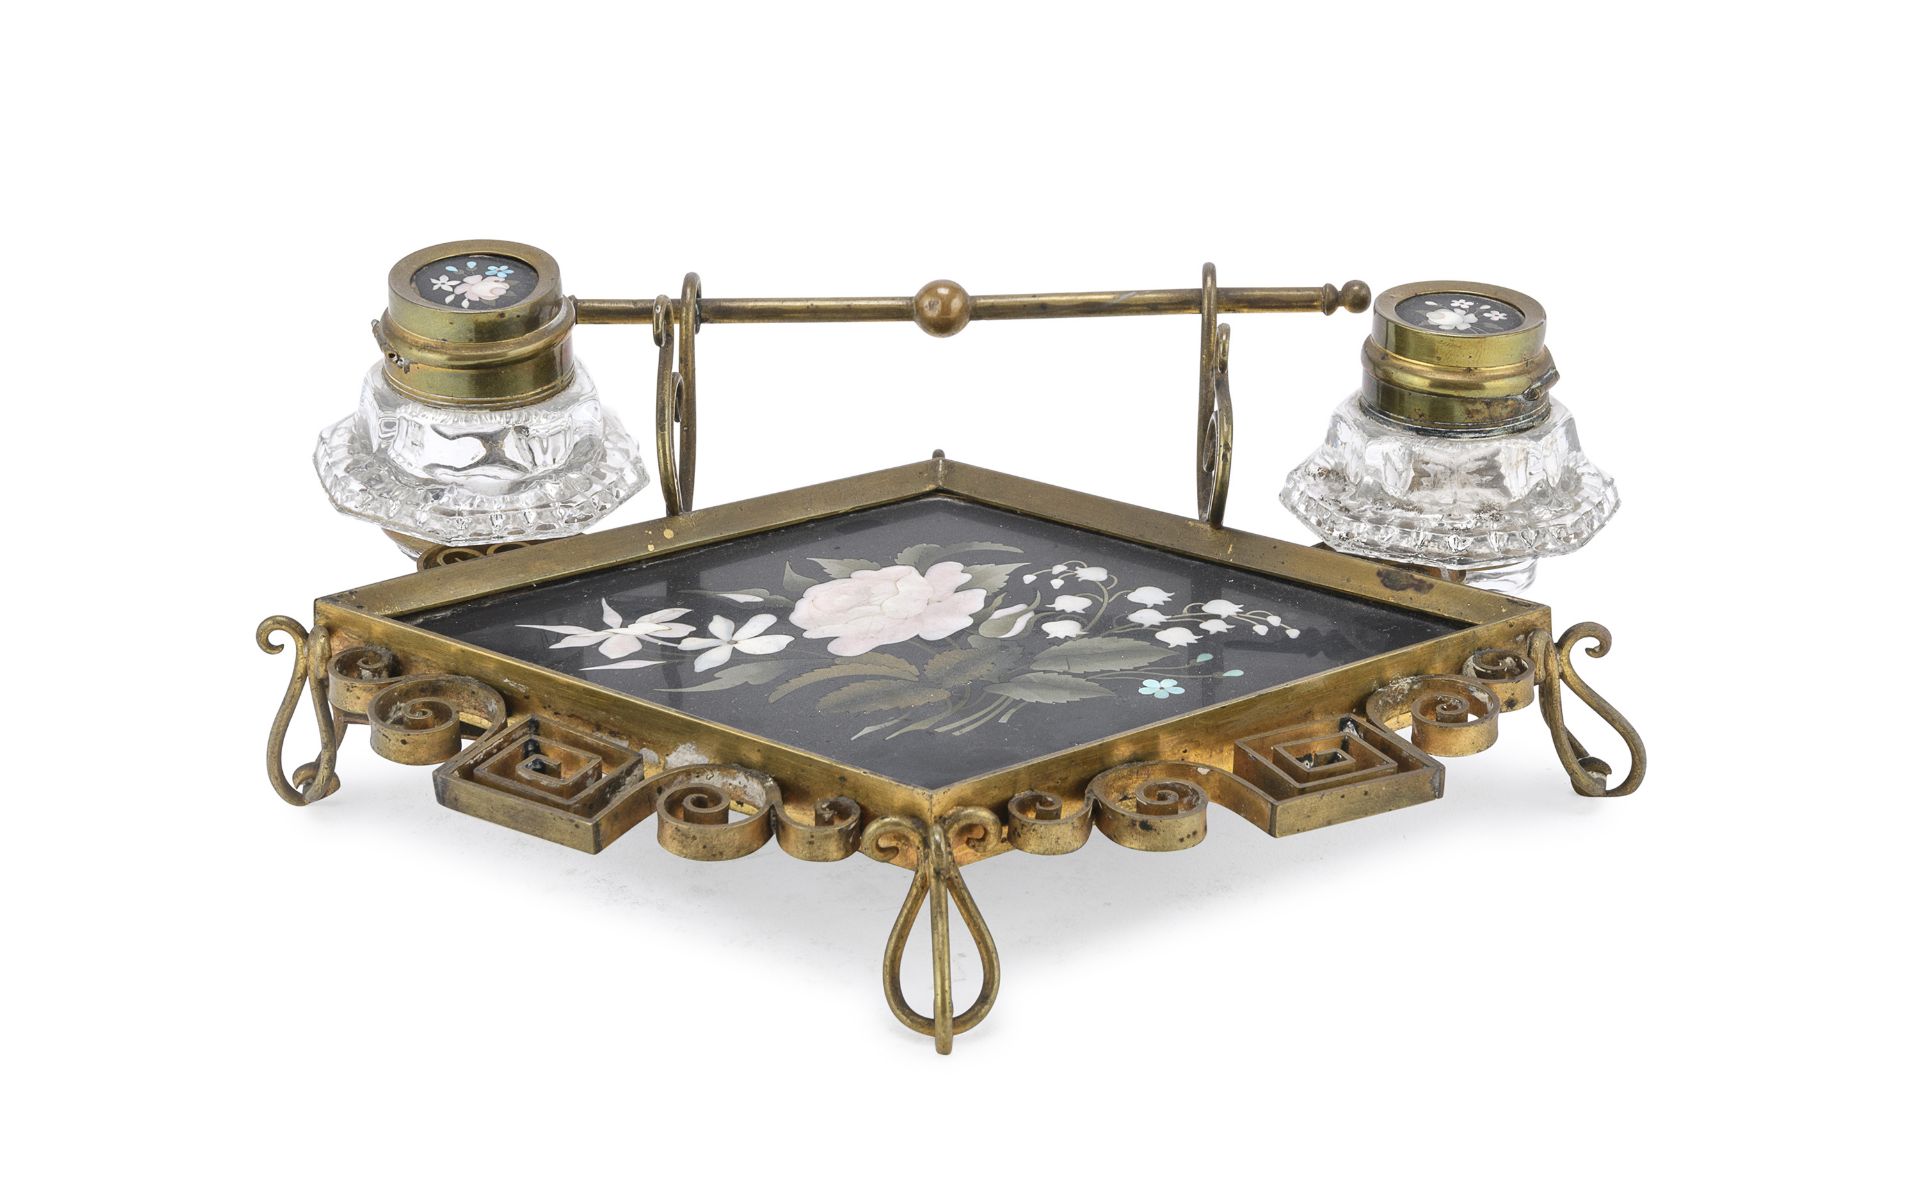 INKWELL WITH MARBLE INLAY LATE 19TH CENTURY